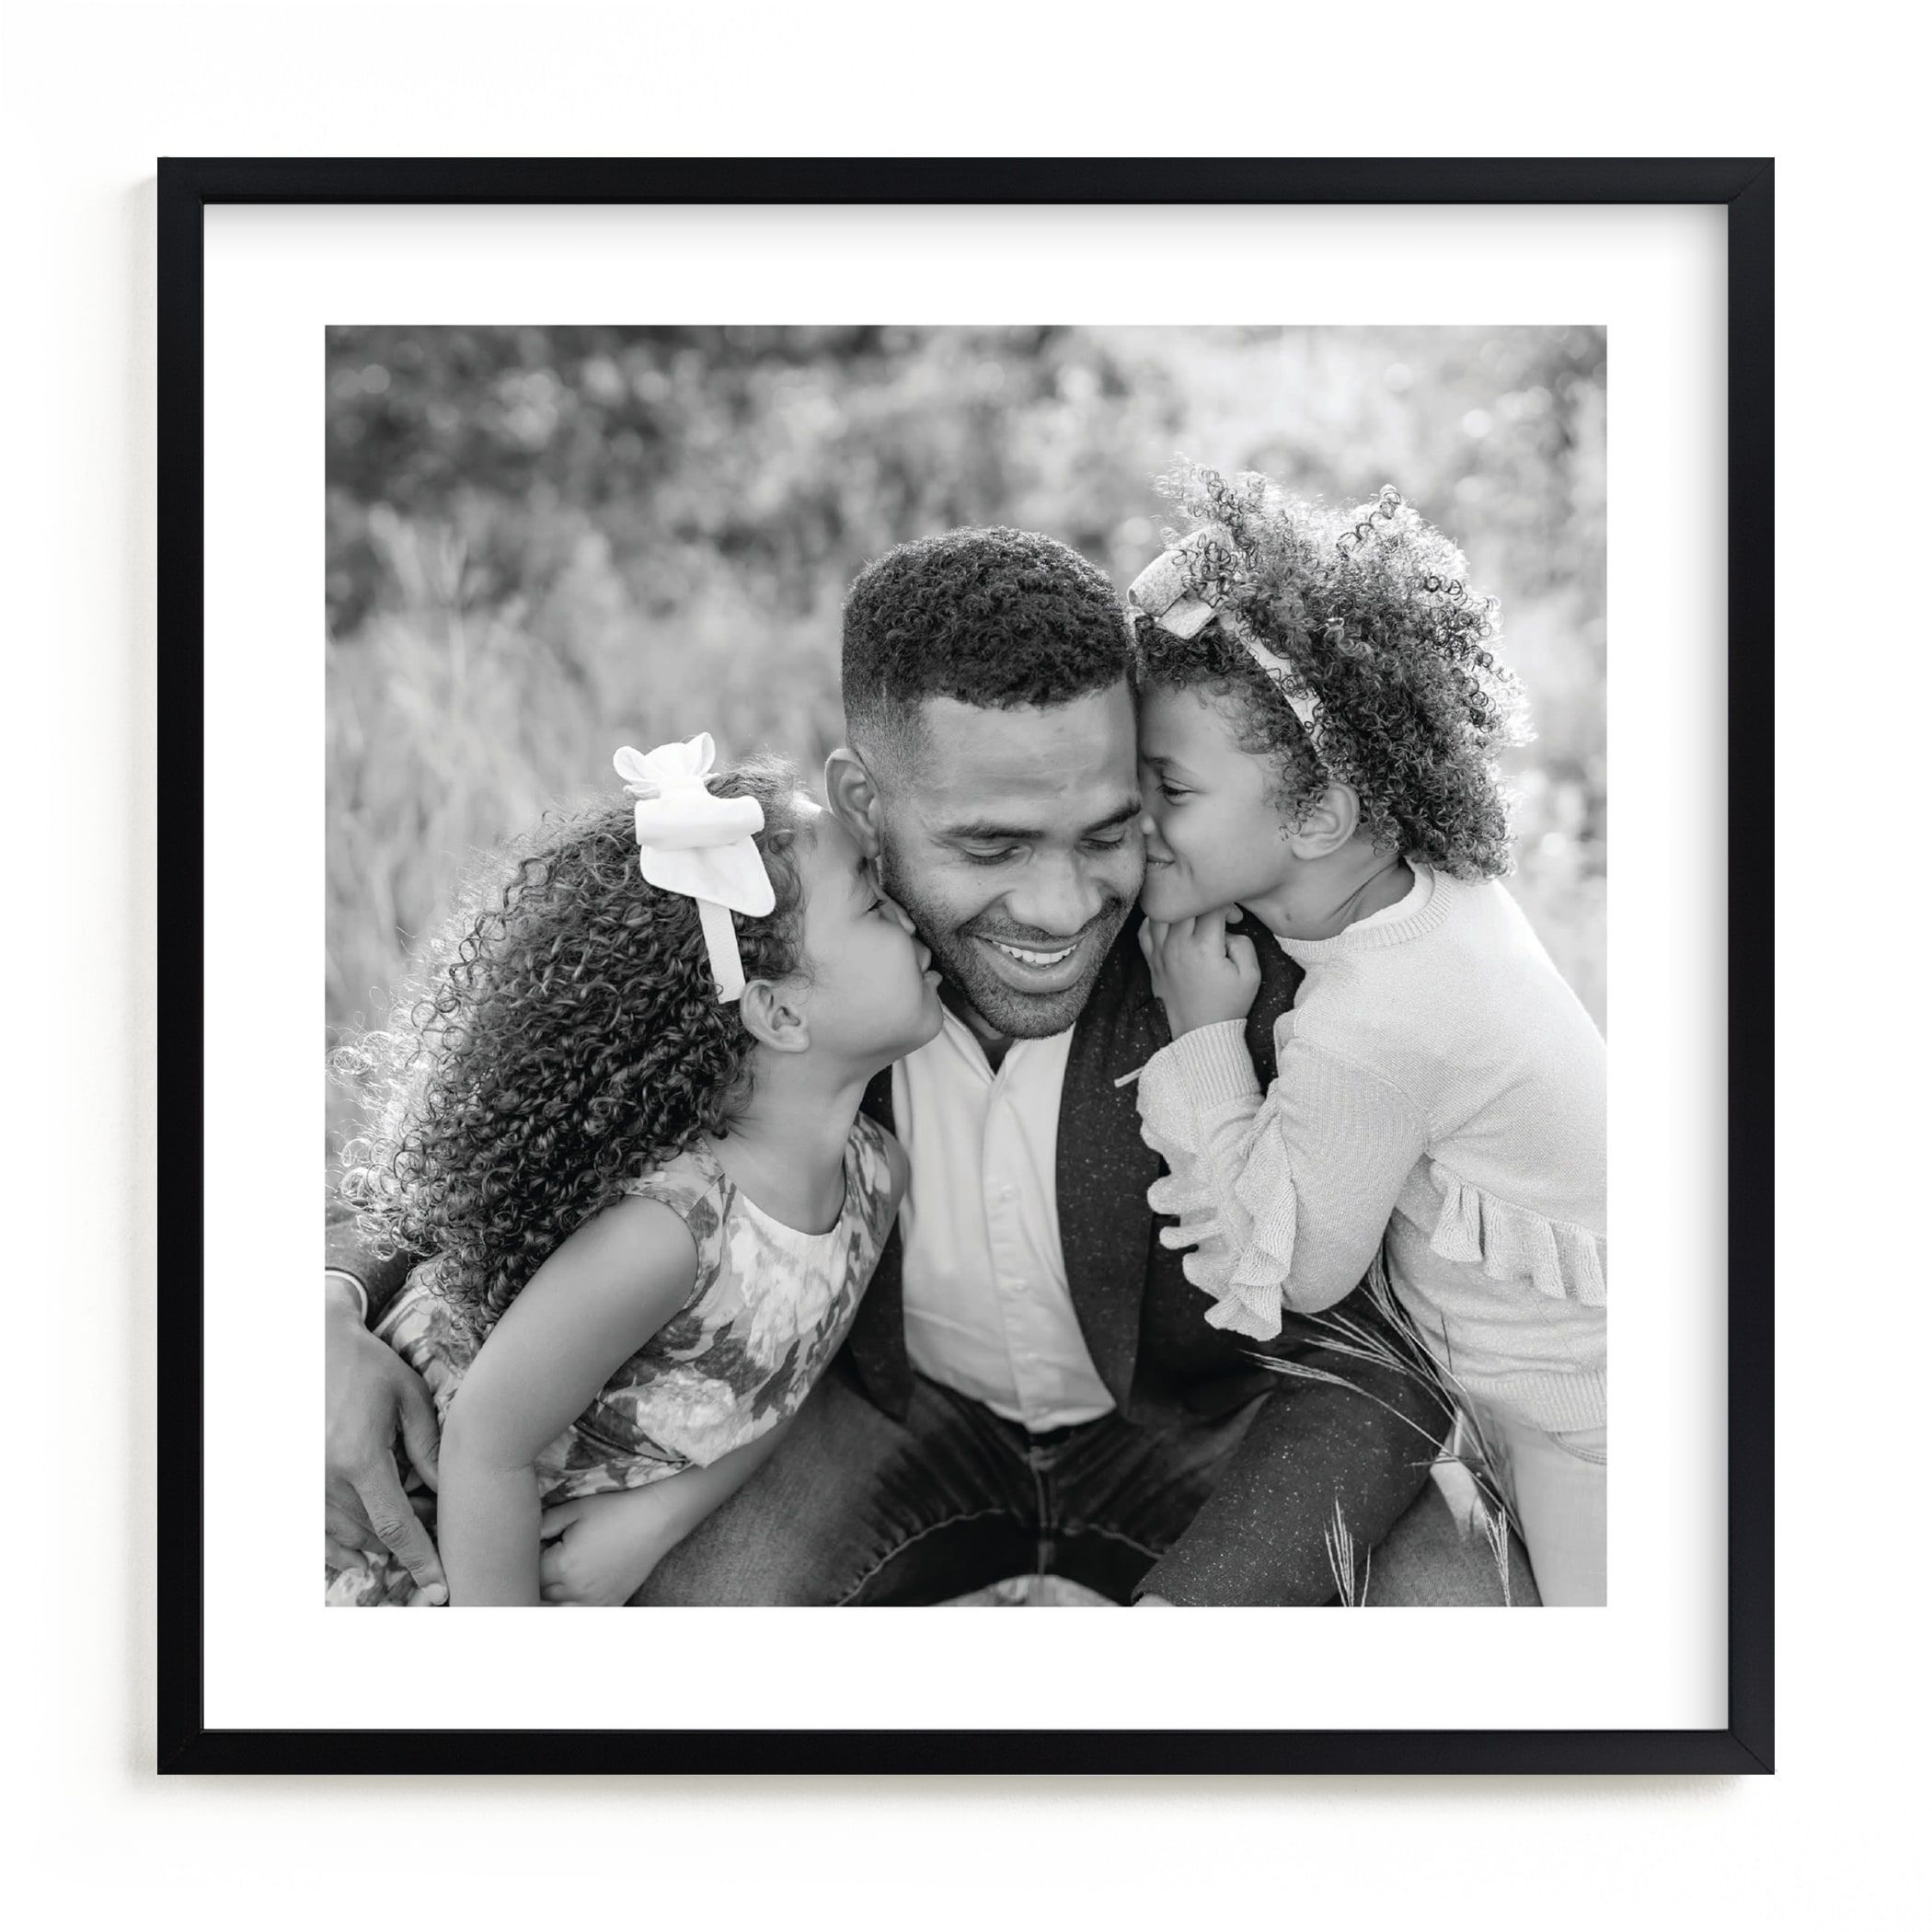 "The Big Picture" - Custom Photo Art Print by Minted. | Minted